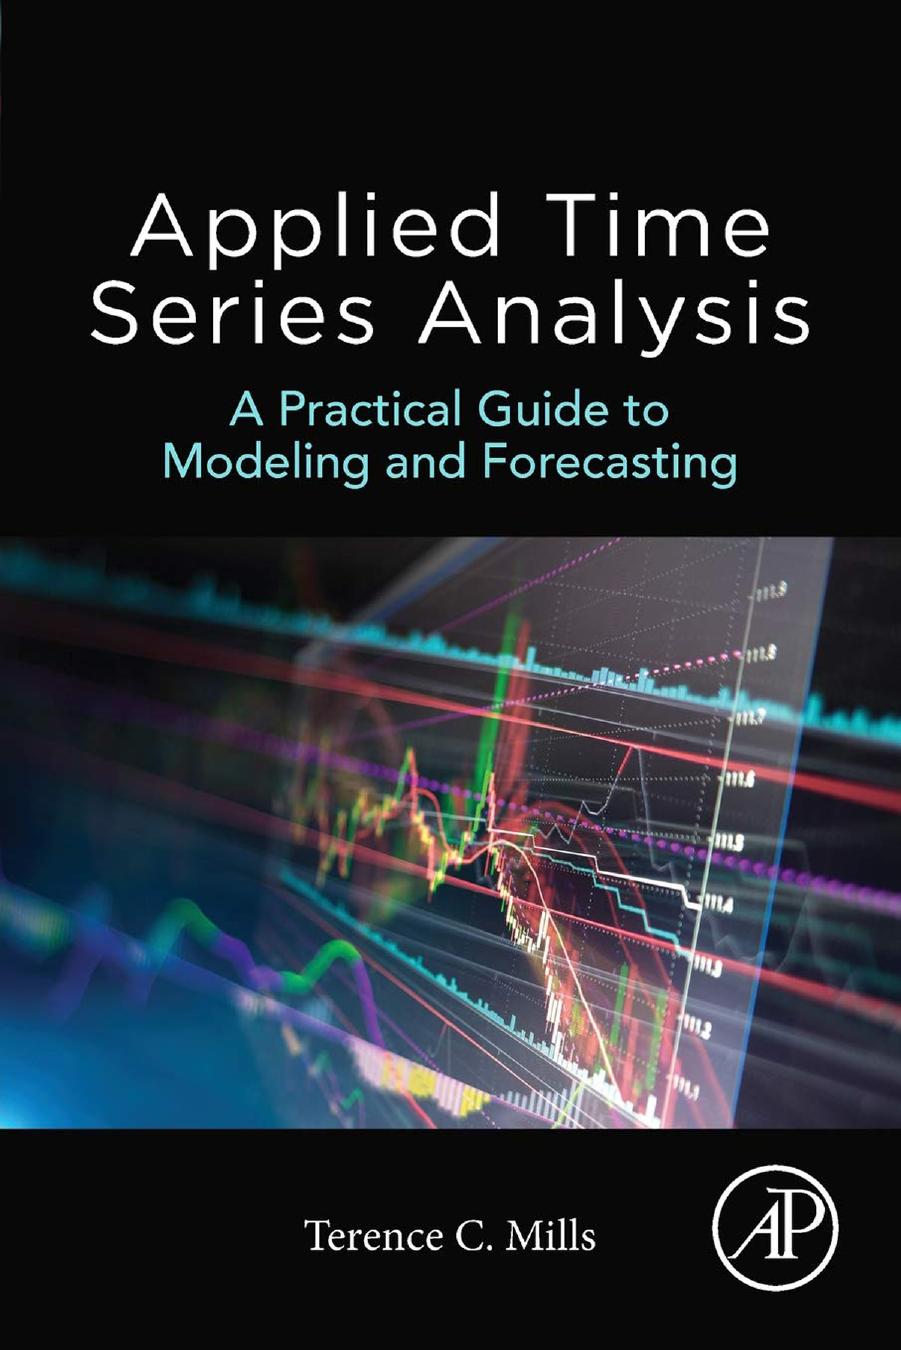 Applied Time Series Analysis A Practical Guide to Modeling and Forecasting 2019 PDF